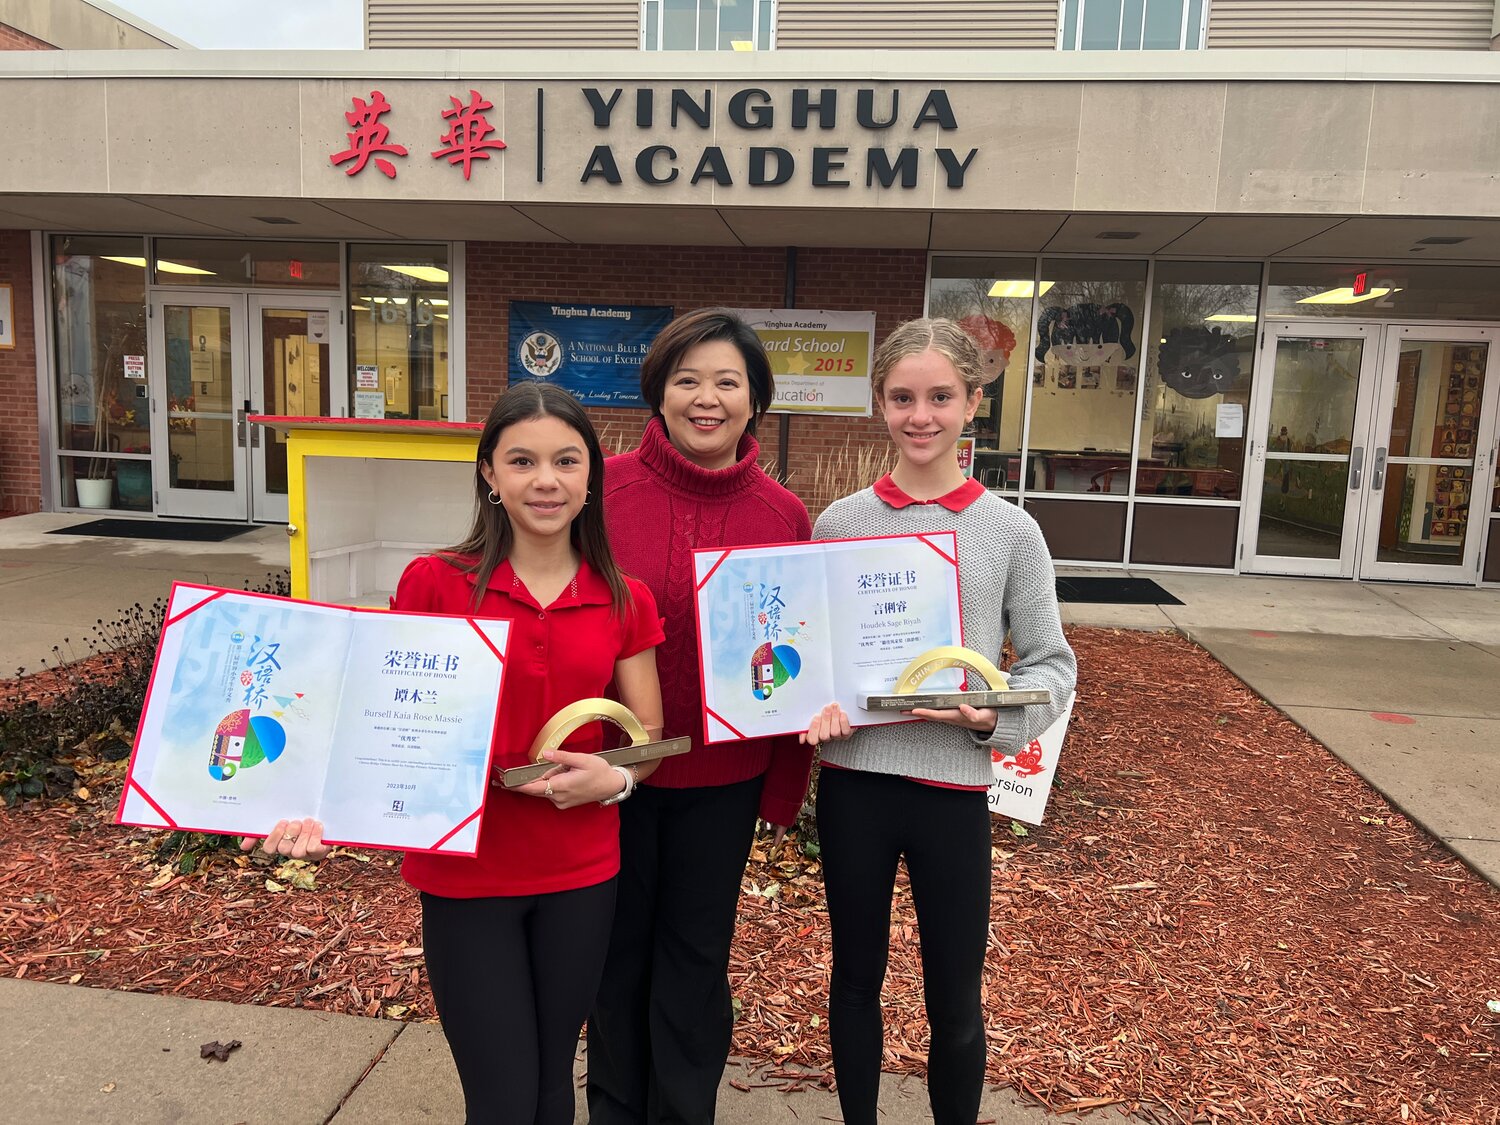 (Left to right) Seventh grader Kaia Bursell, Yinghua Academy Director Dr. Luyi Lien, and sixth grader Sage Houdek hold their certificates and awards from Chinese Bridge.